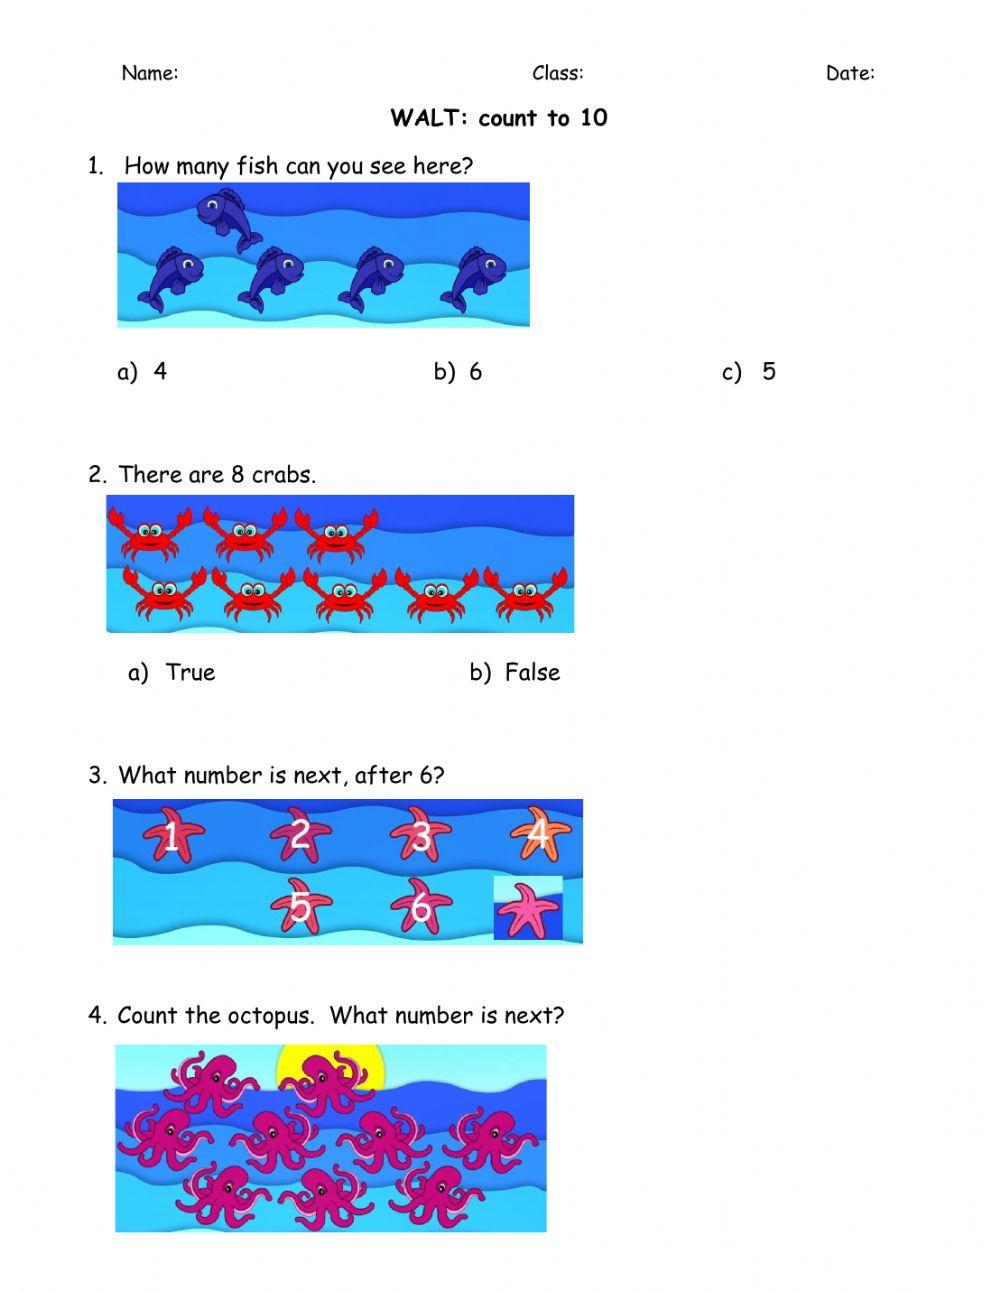 Count to 10 sea animals